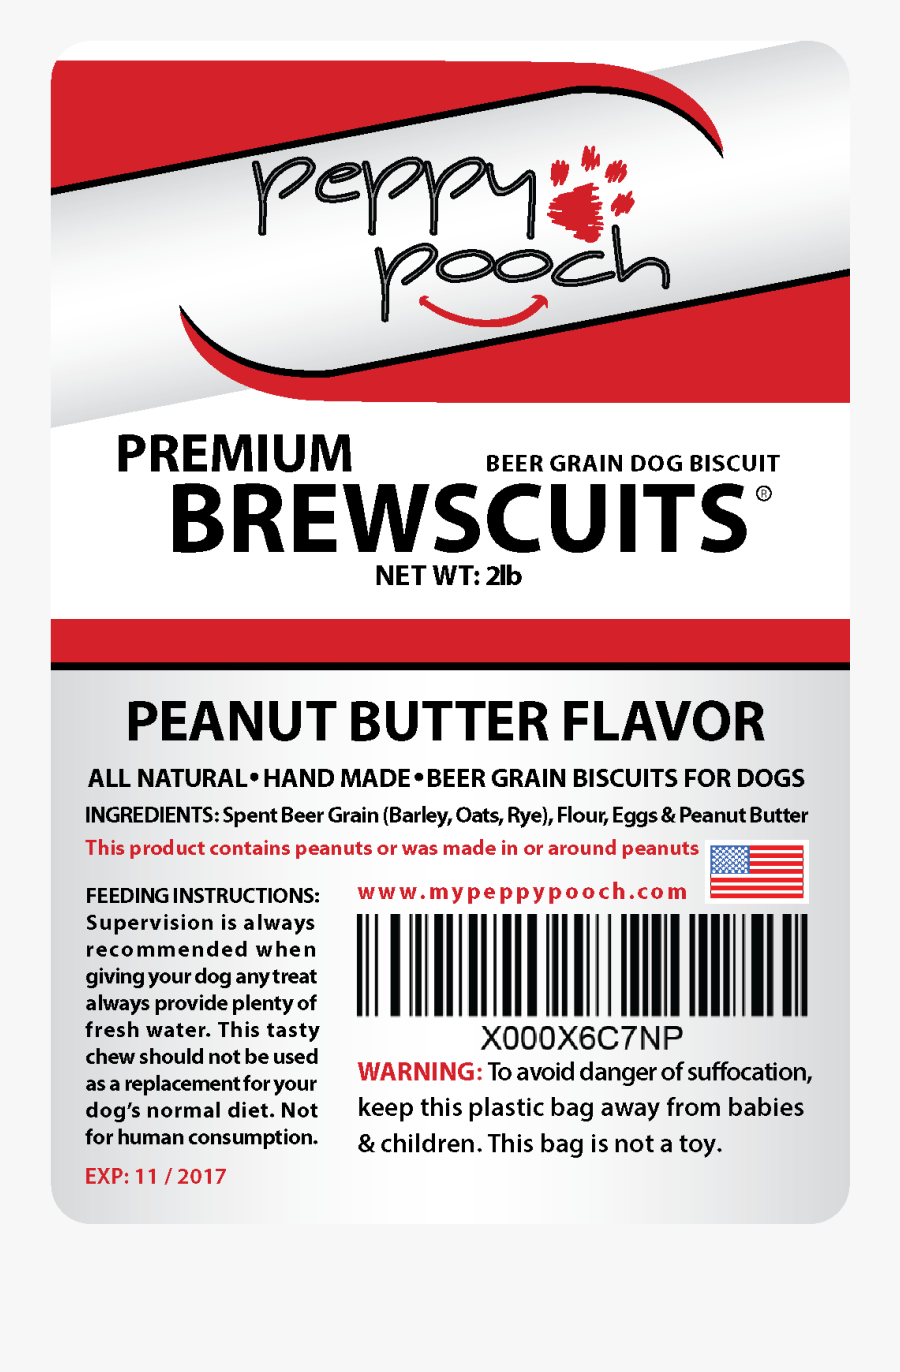 Peppy Pooch Peanut Butter Flavor Dog Biscuits Product - Back Label Of Dog Treats, Transparent Clipart